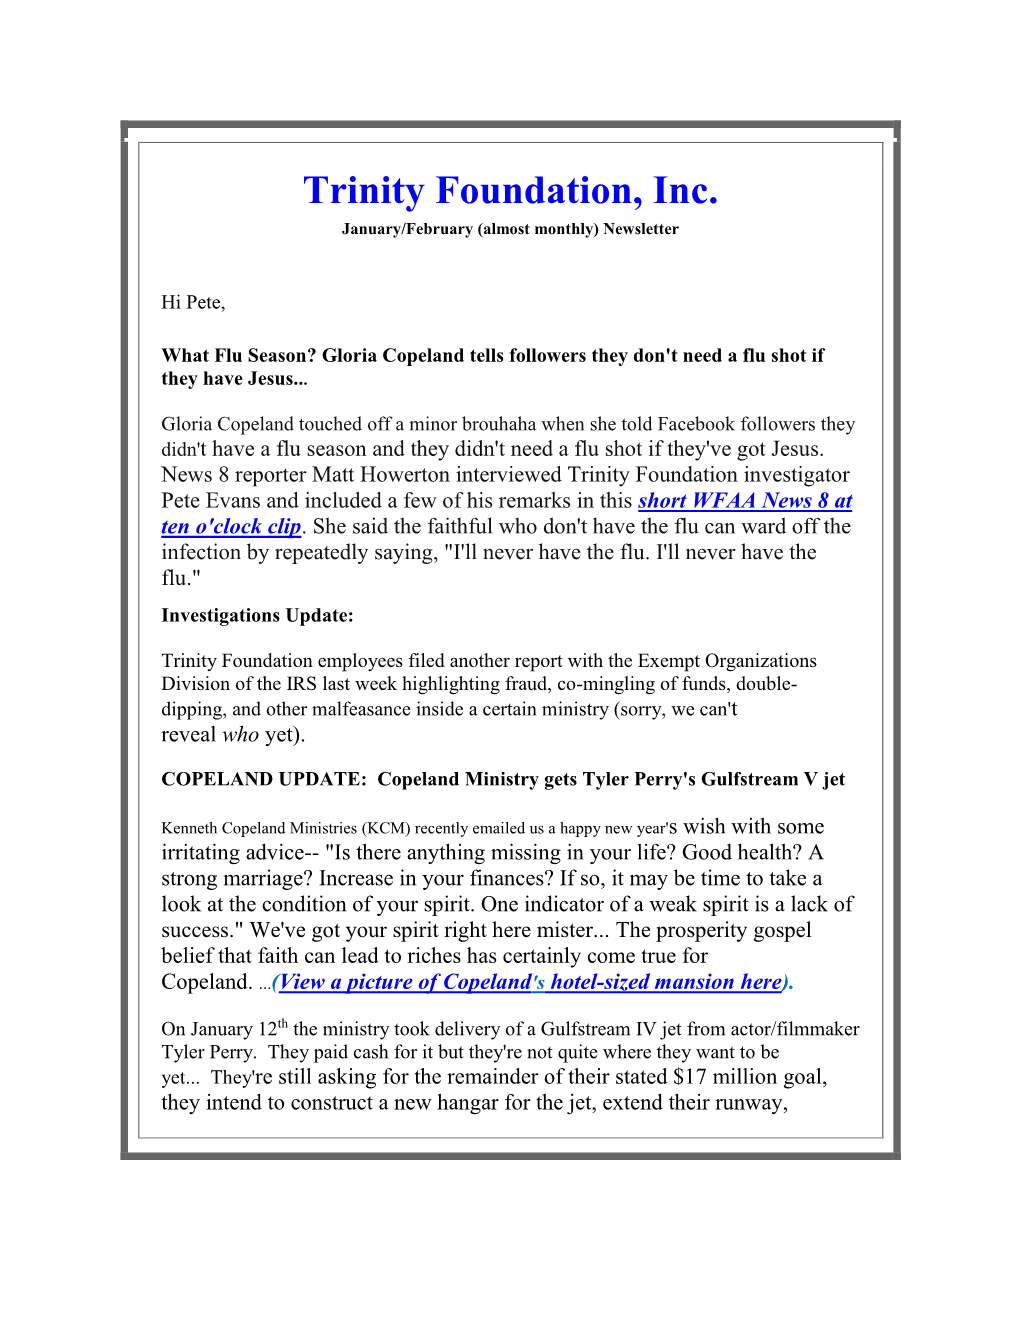 Trinity Foundation, Inc. January/February (Almost Monthly) Newsletter